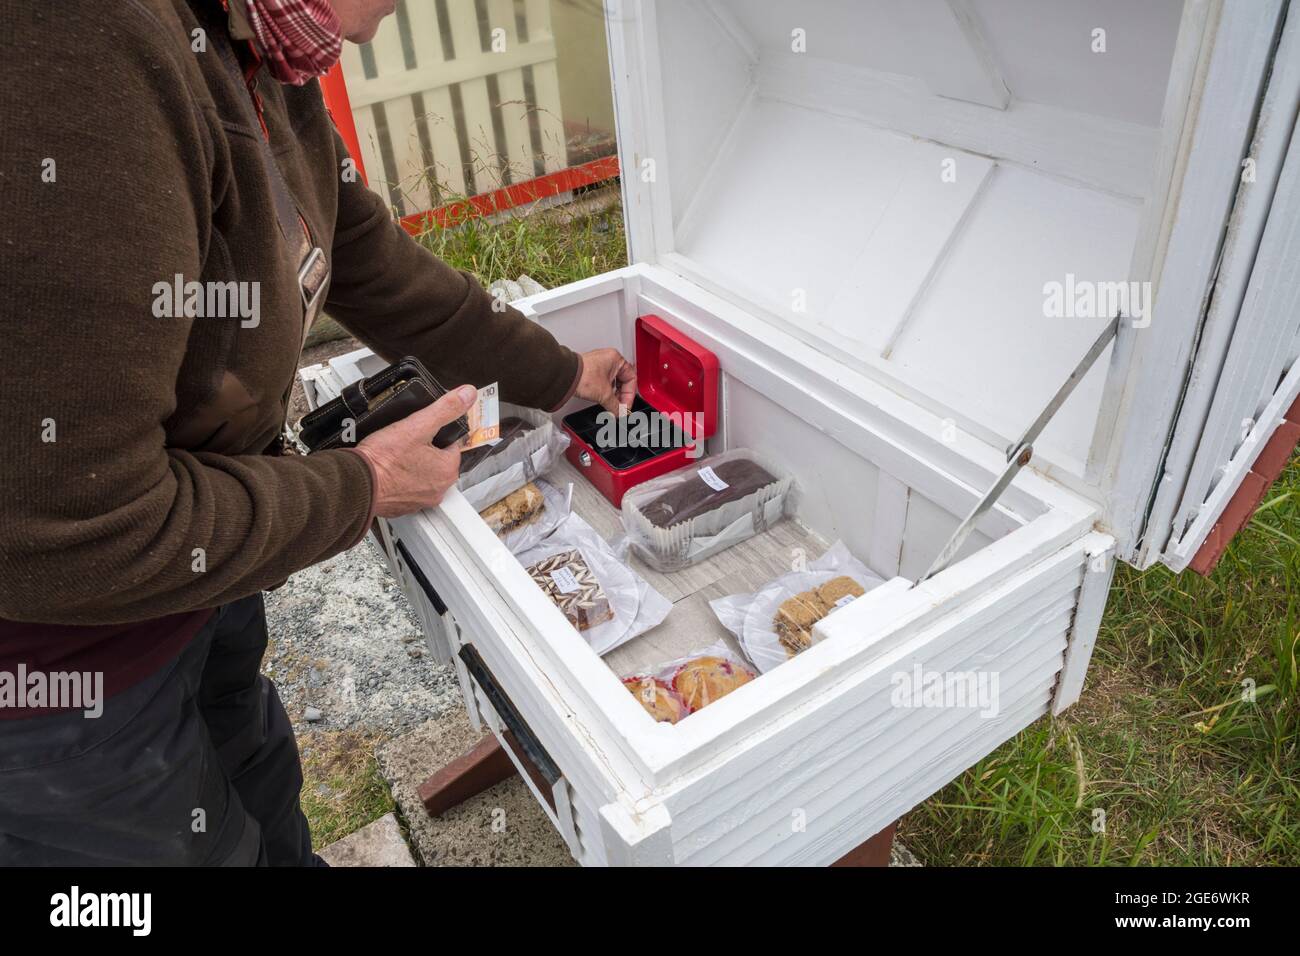 Woman buying food from a roadside stand with an honesty box at Baltasound on the island of Unst, Shetland. Stock Photo